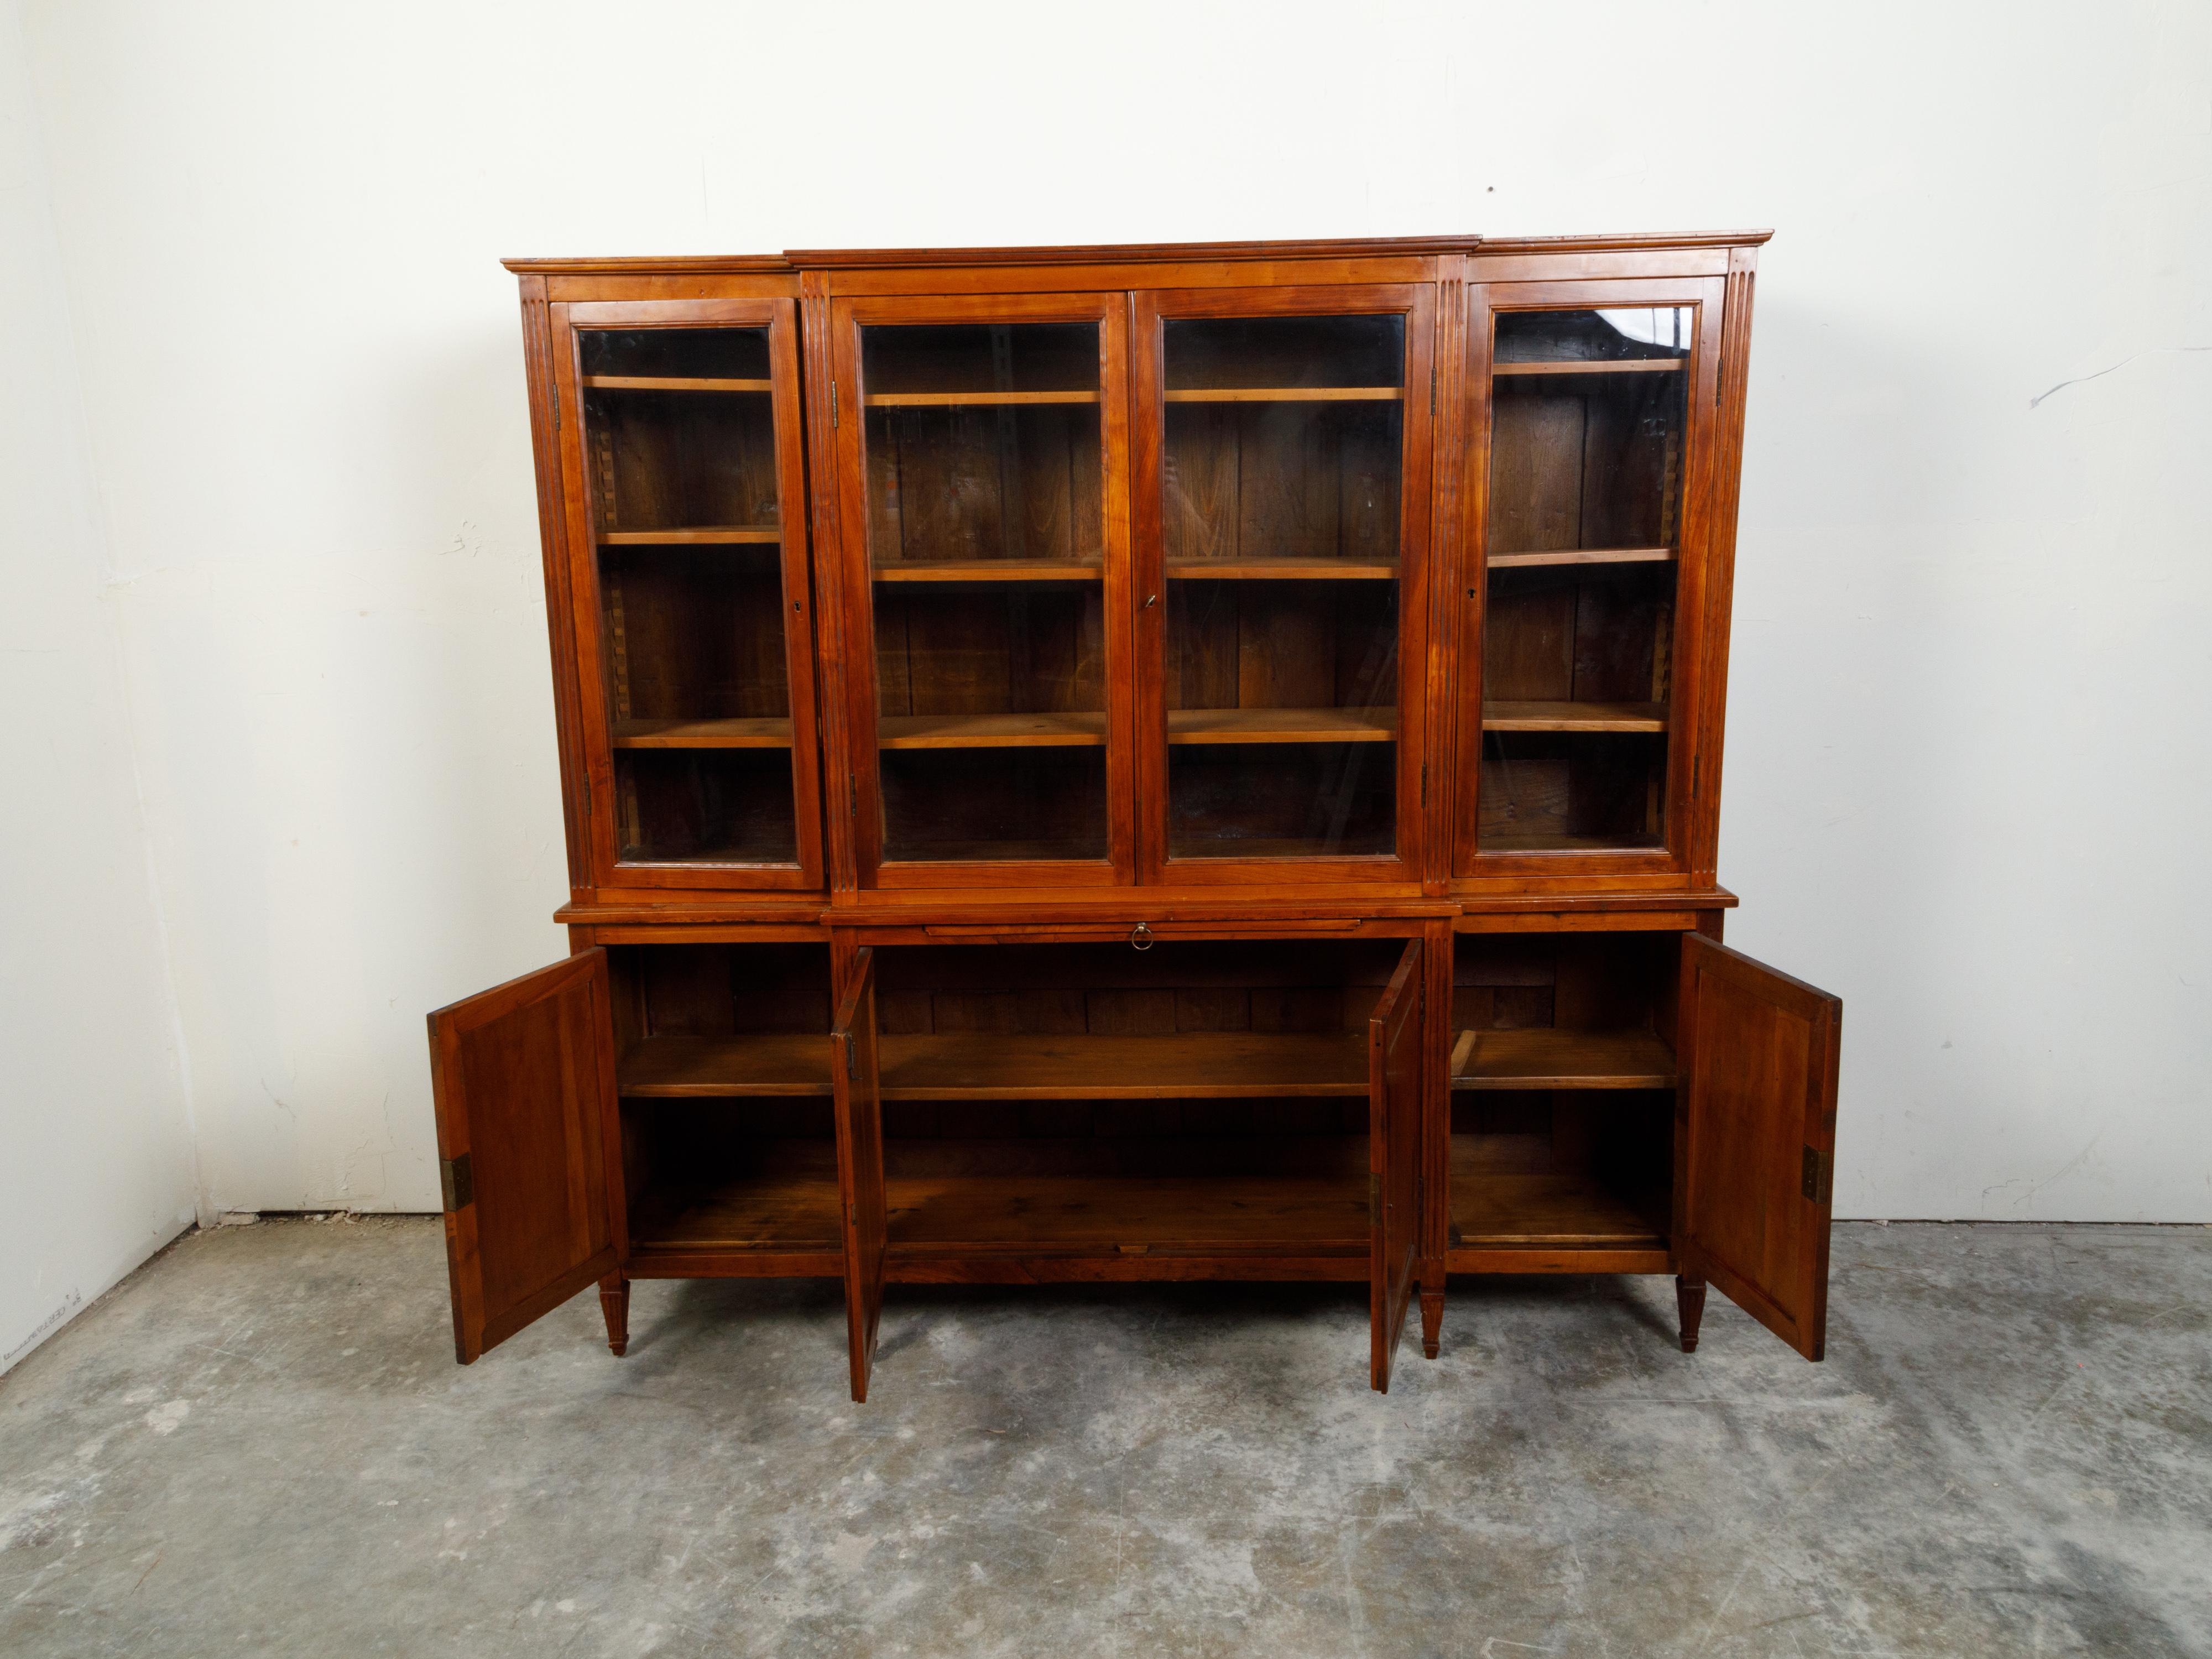 French Restauration Period 1820s Walnut Breakfront Bookcase with Glass Doors For Sale 3